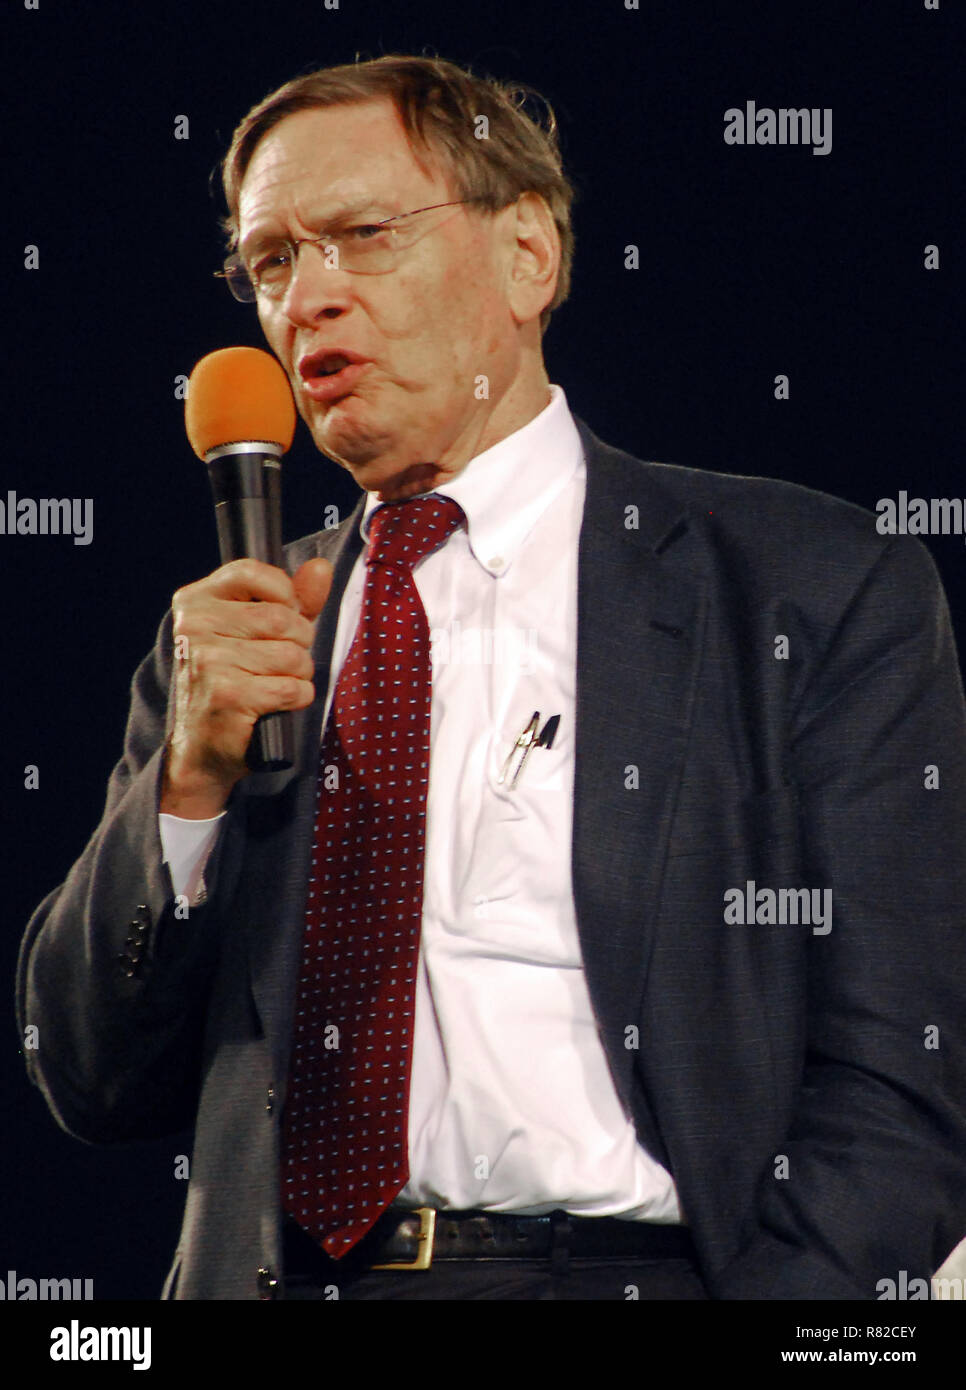 Major League Baseball Commissioner Bud Selig speaks during the dedication of the Hank Aaron Museum in Mobile, Alabama. Stock Photo